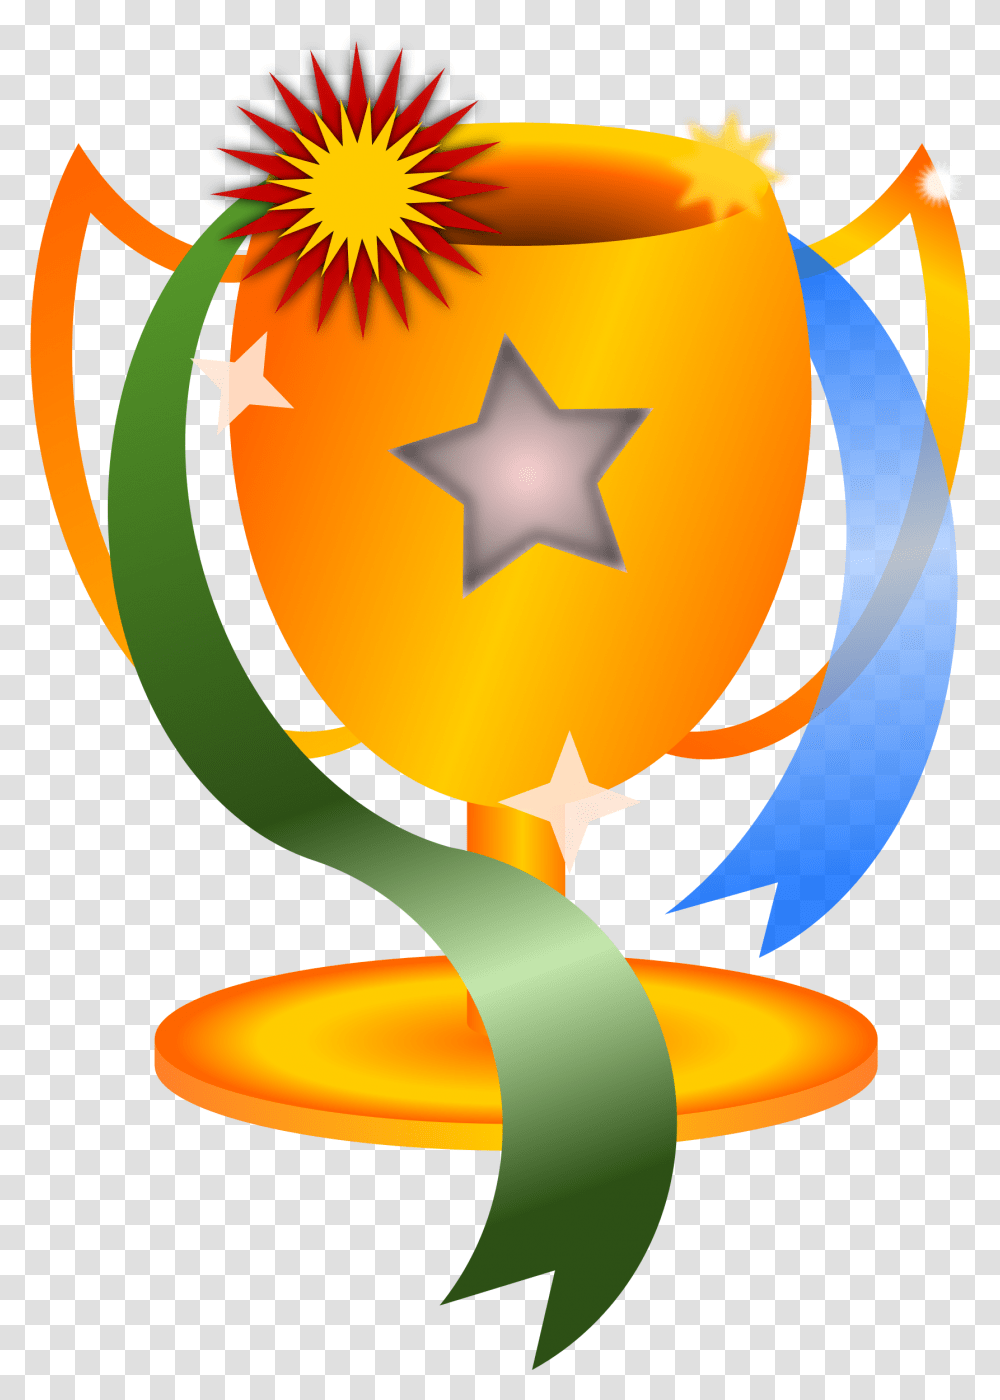 Trophy And Medals Clipart, Star Symbol Transparent Png